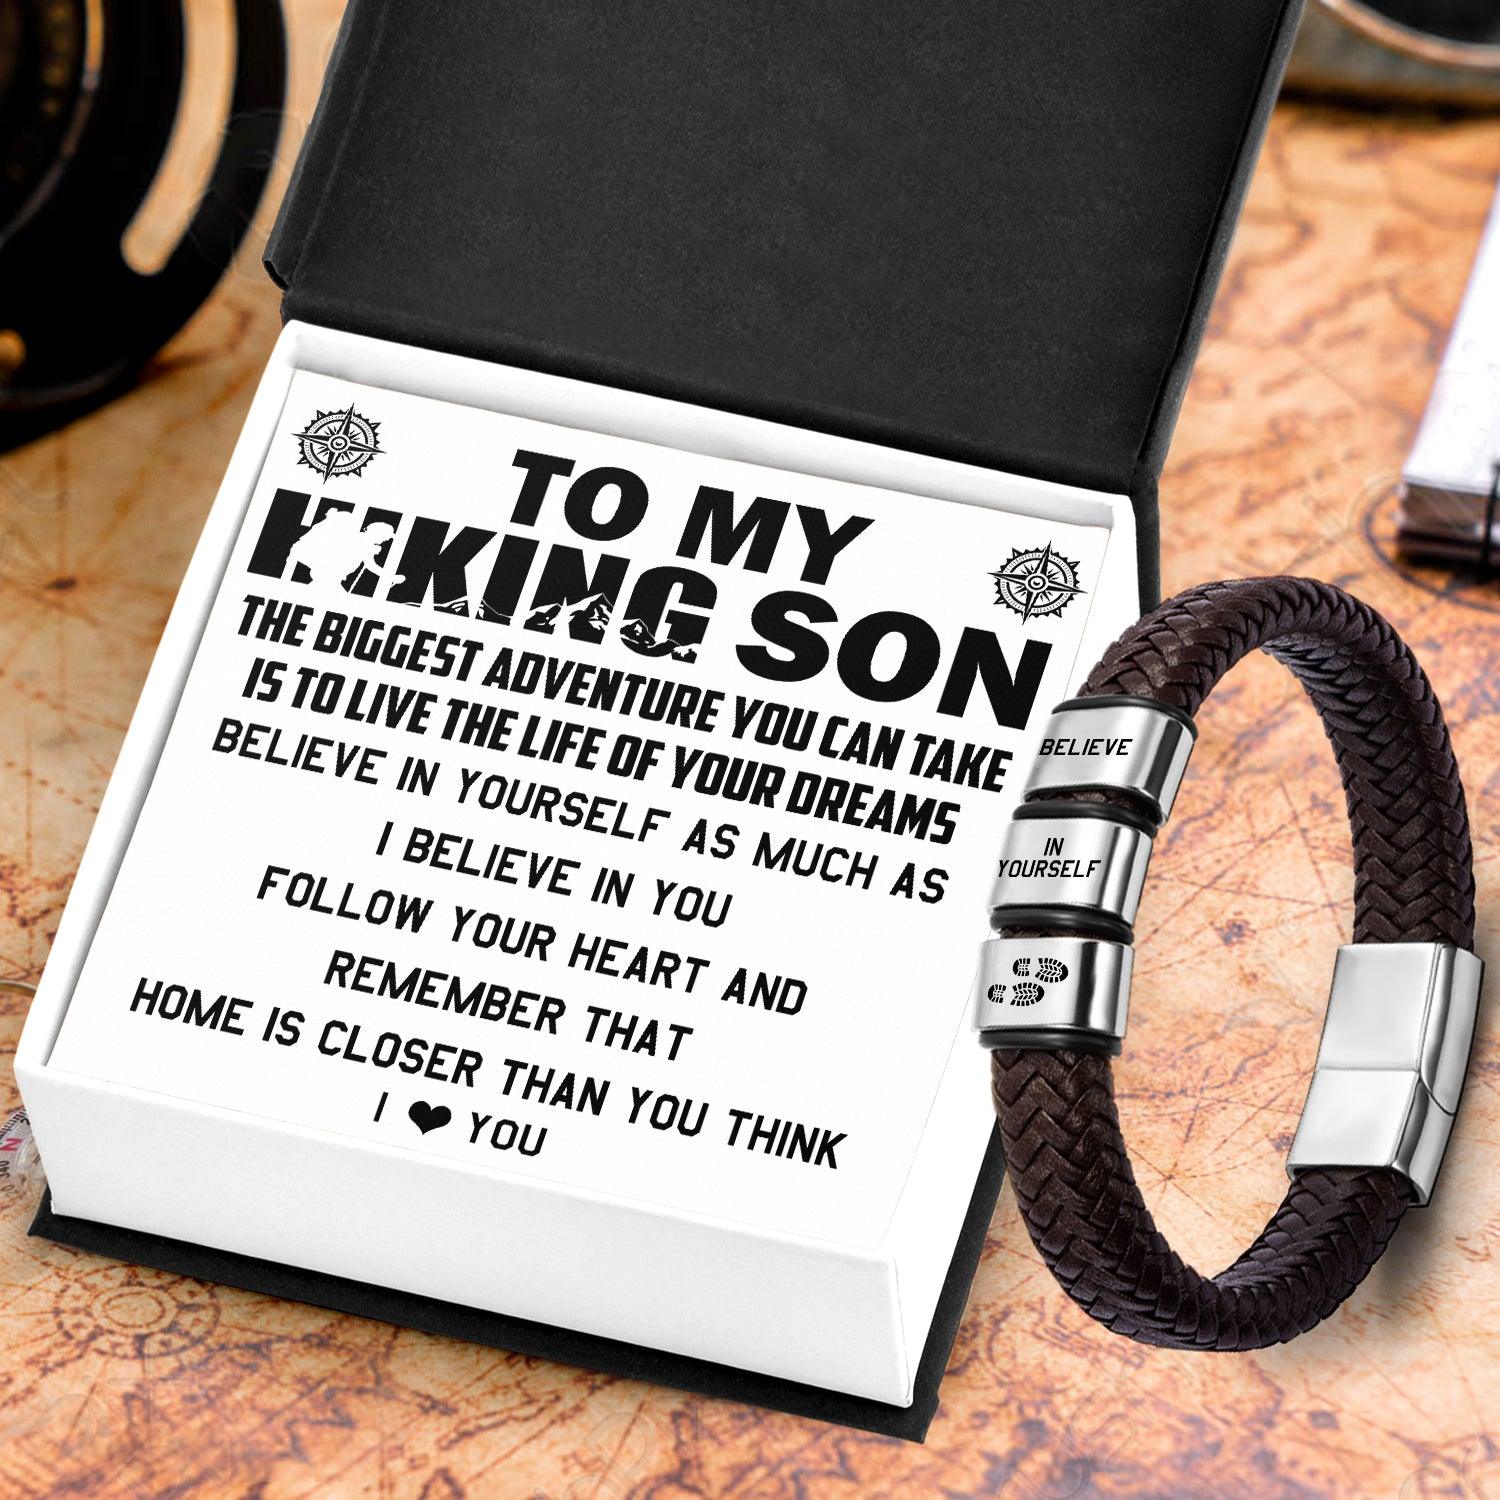 Leather Bracelet - Hiking - To My Hiking Son - Live The Life Of Your Dreams - Augbzl16010 - Gifts Holder